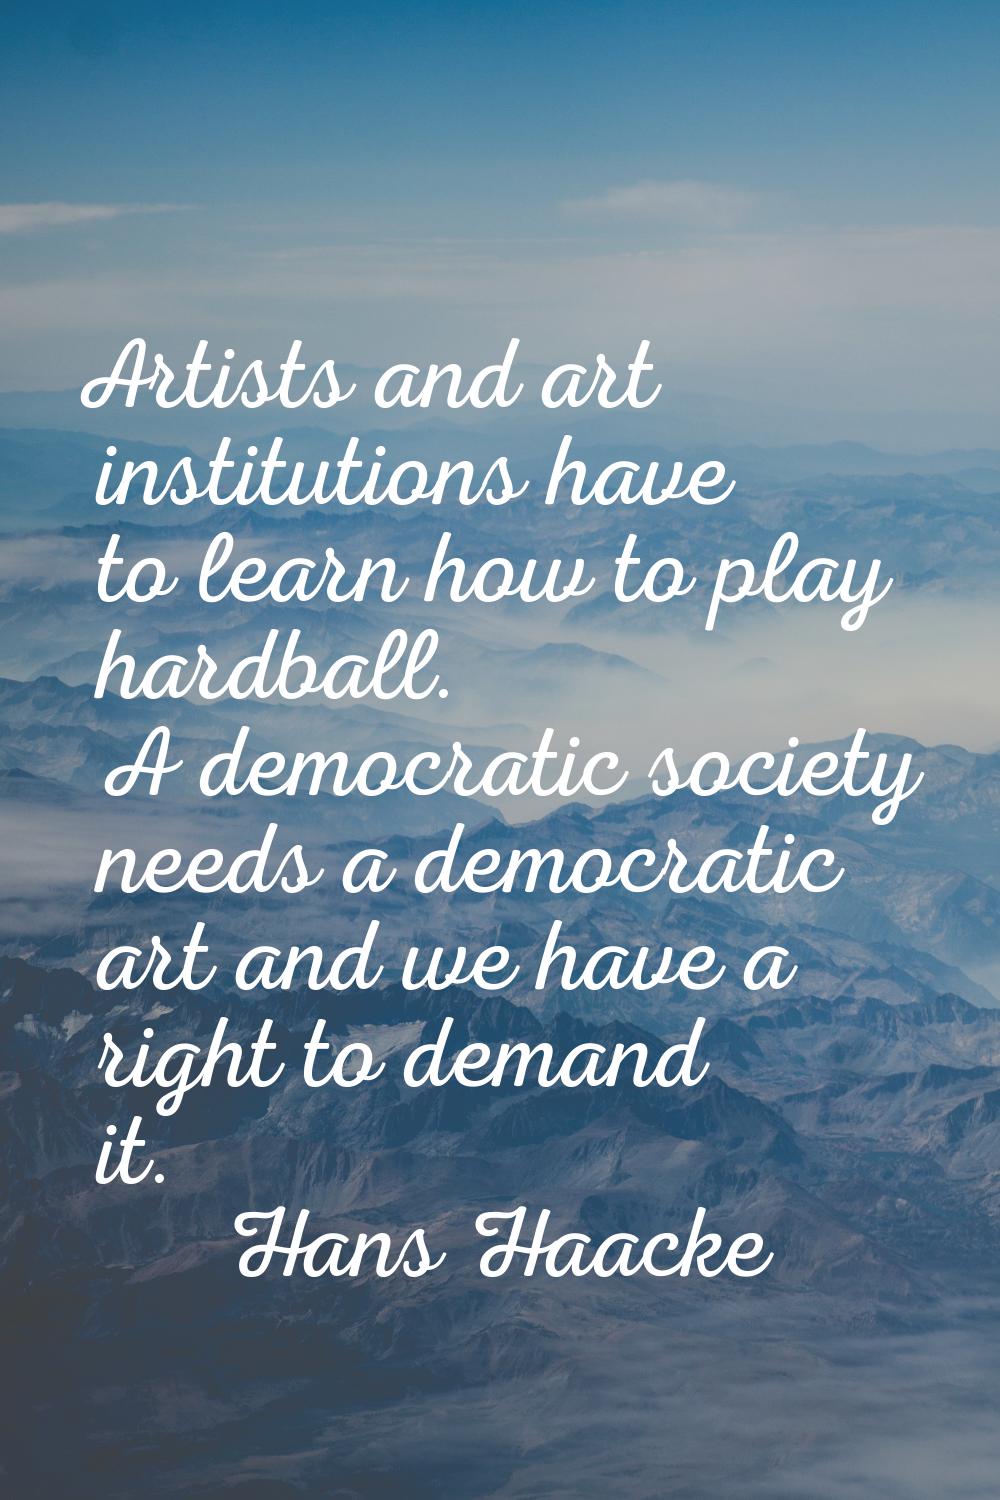 Artists and art institutions have to learn how to play hardball. A democratic society needs a democ